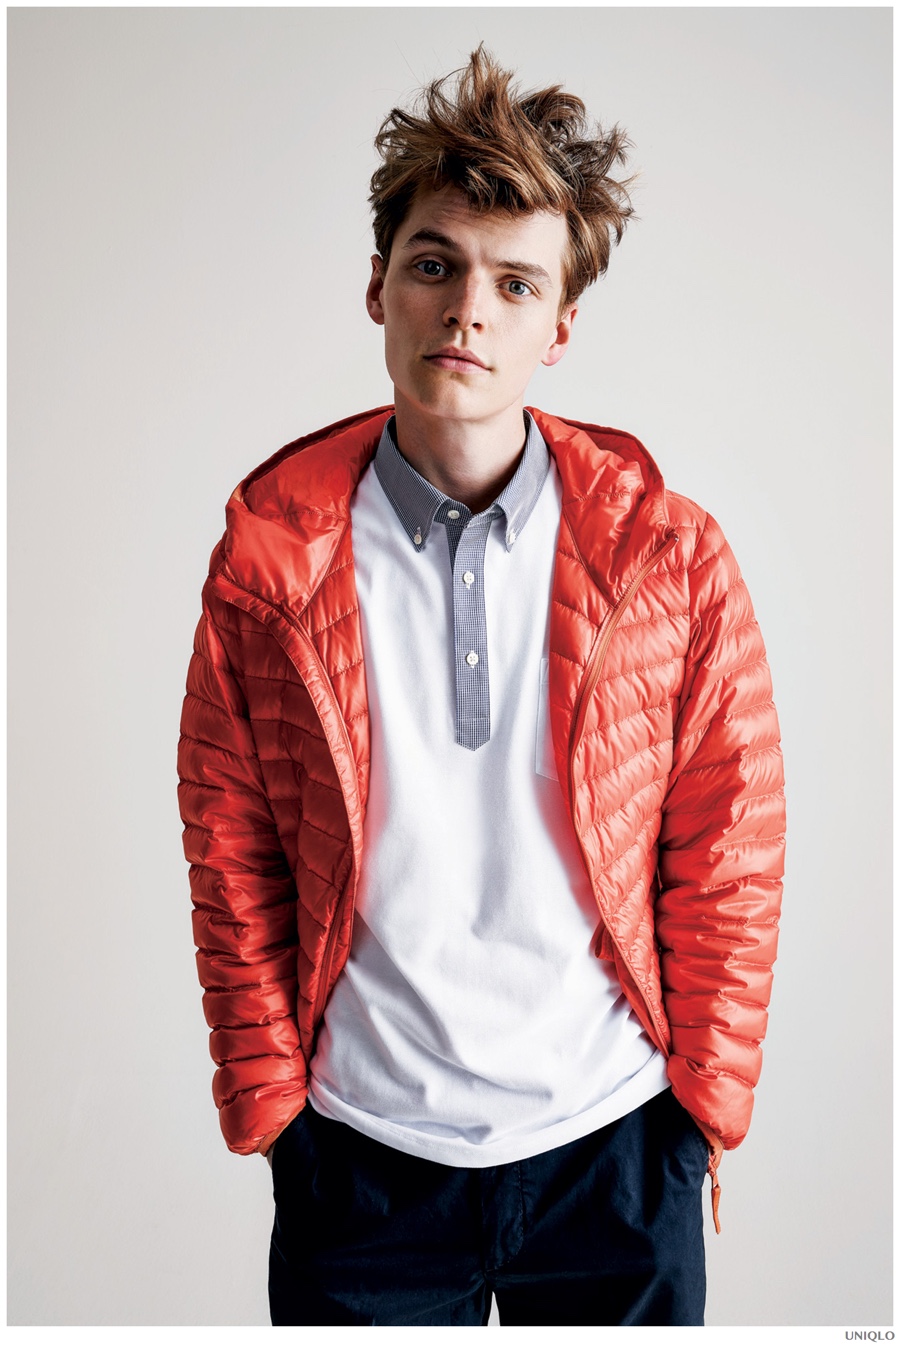 UNIQLO Embraces Simple & Fitted Men's Fashions for Spring/Summer 2015